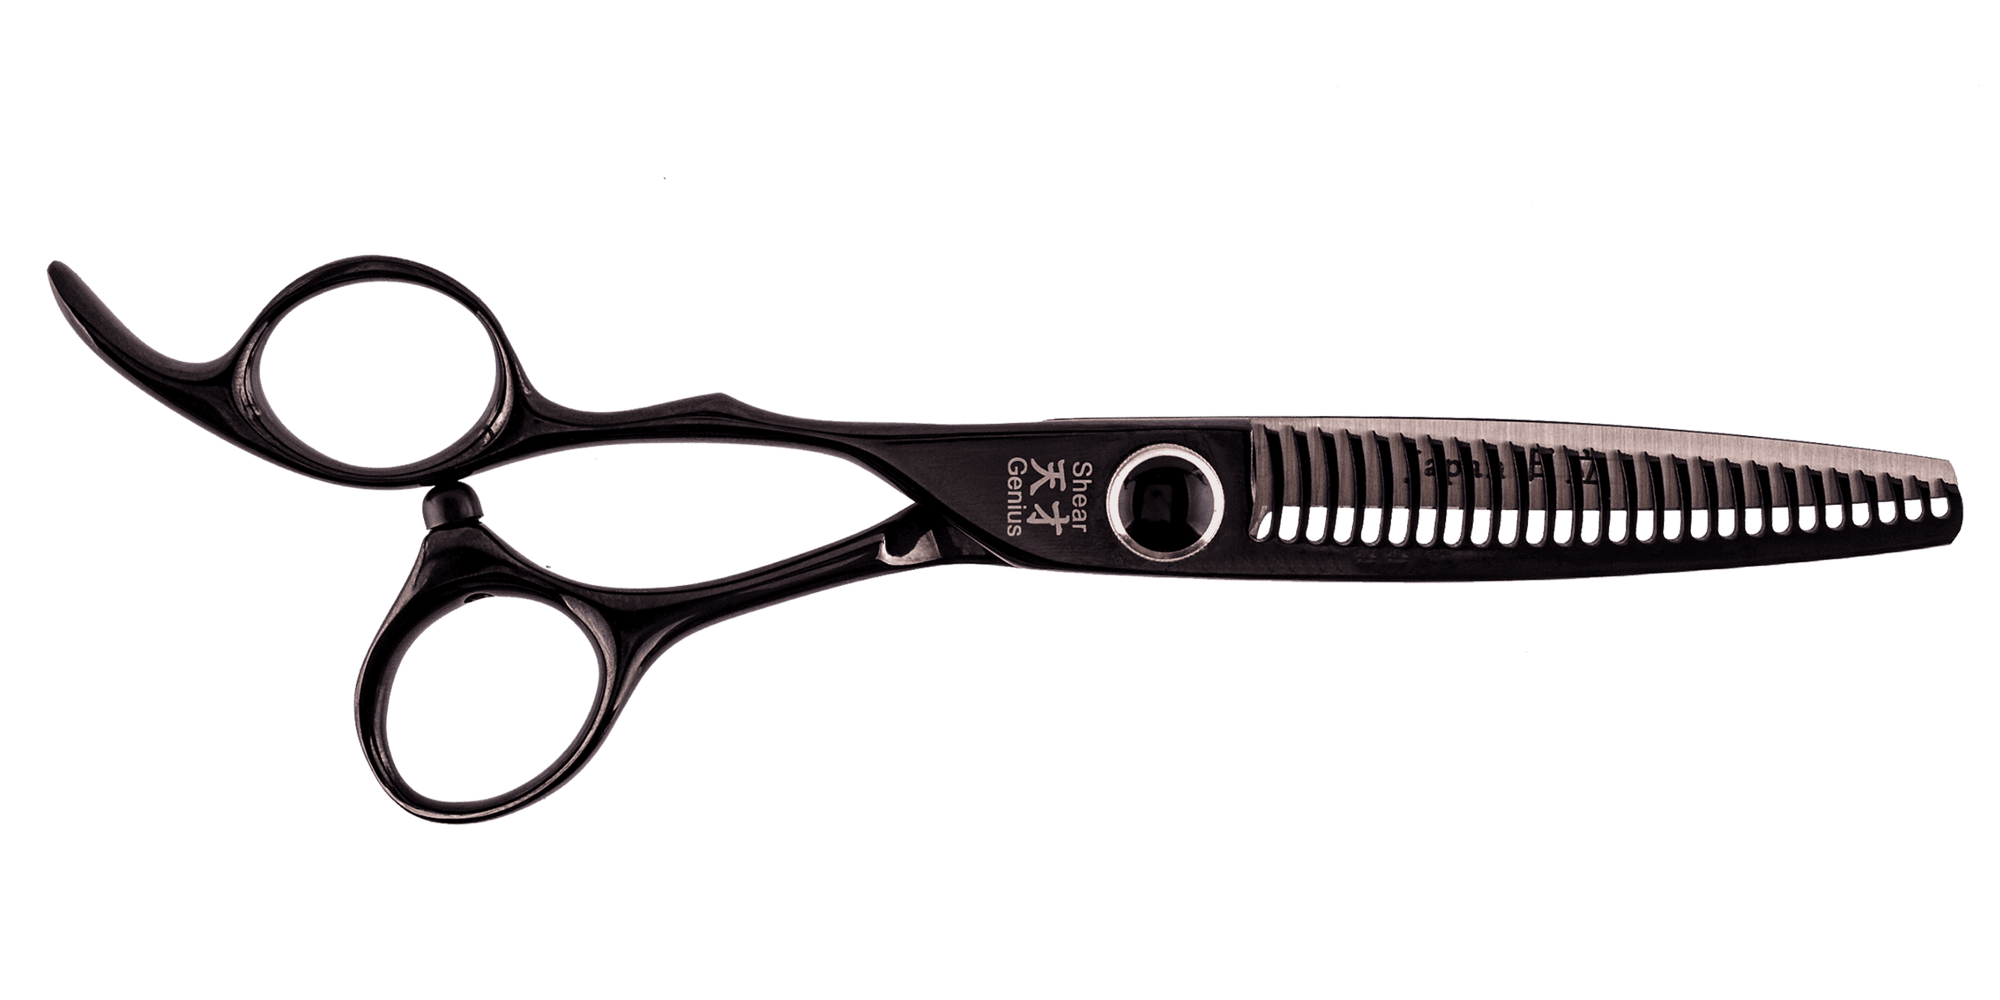 Geisha is a 26-tooth medium texturizing shear that will float through your client’s hair. Each tooth is micro serrated and perfectly arched, allowing the hair to sli{{ product.title | escape }} - High-Quality Professional Hairdressing Scissors